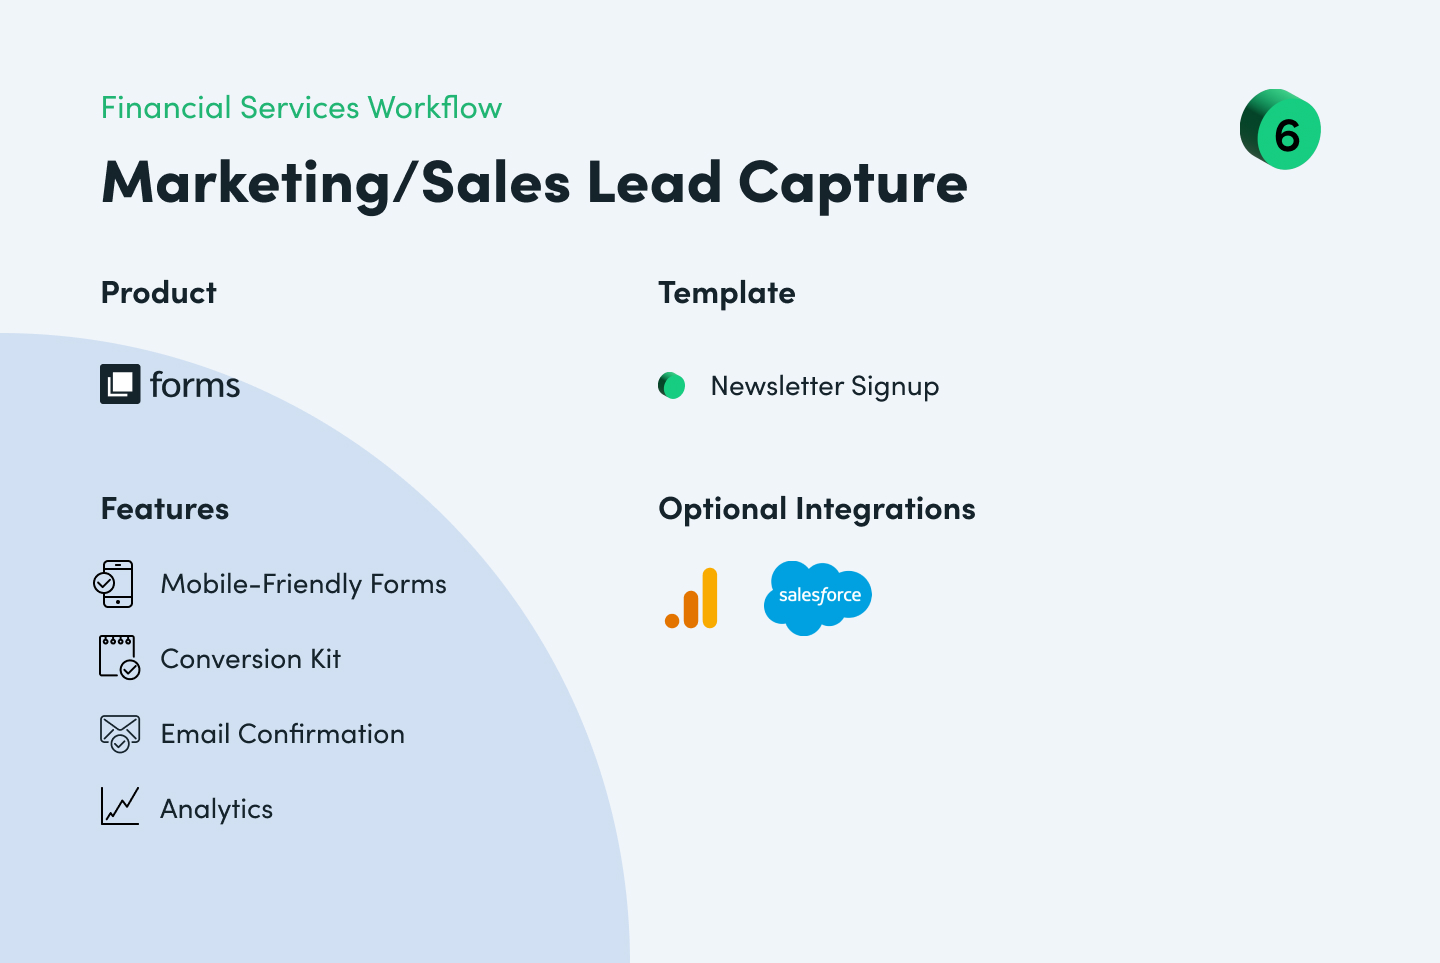 Financial Services Marketing/Sales Lead Capture Workflow Examplem